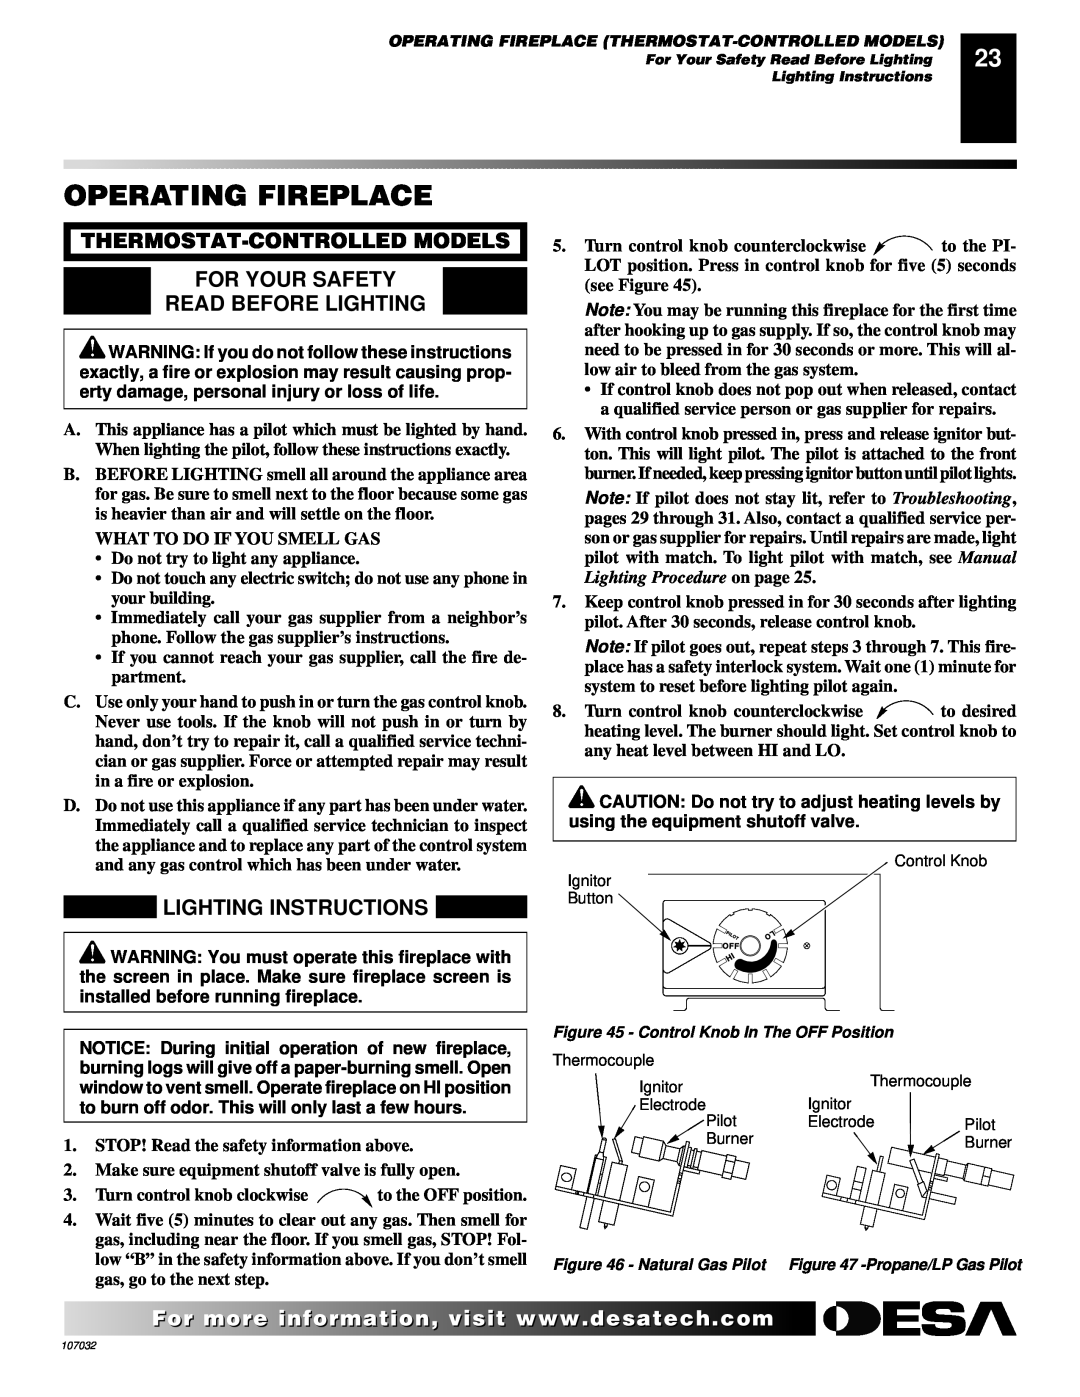 Desa VMH10TPB installation manual Operating Fireplace, Thermostat-Controlledmodels For Your Safety, Read Before Lighting 